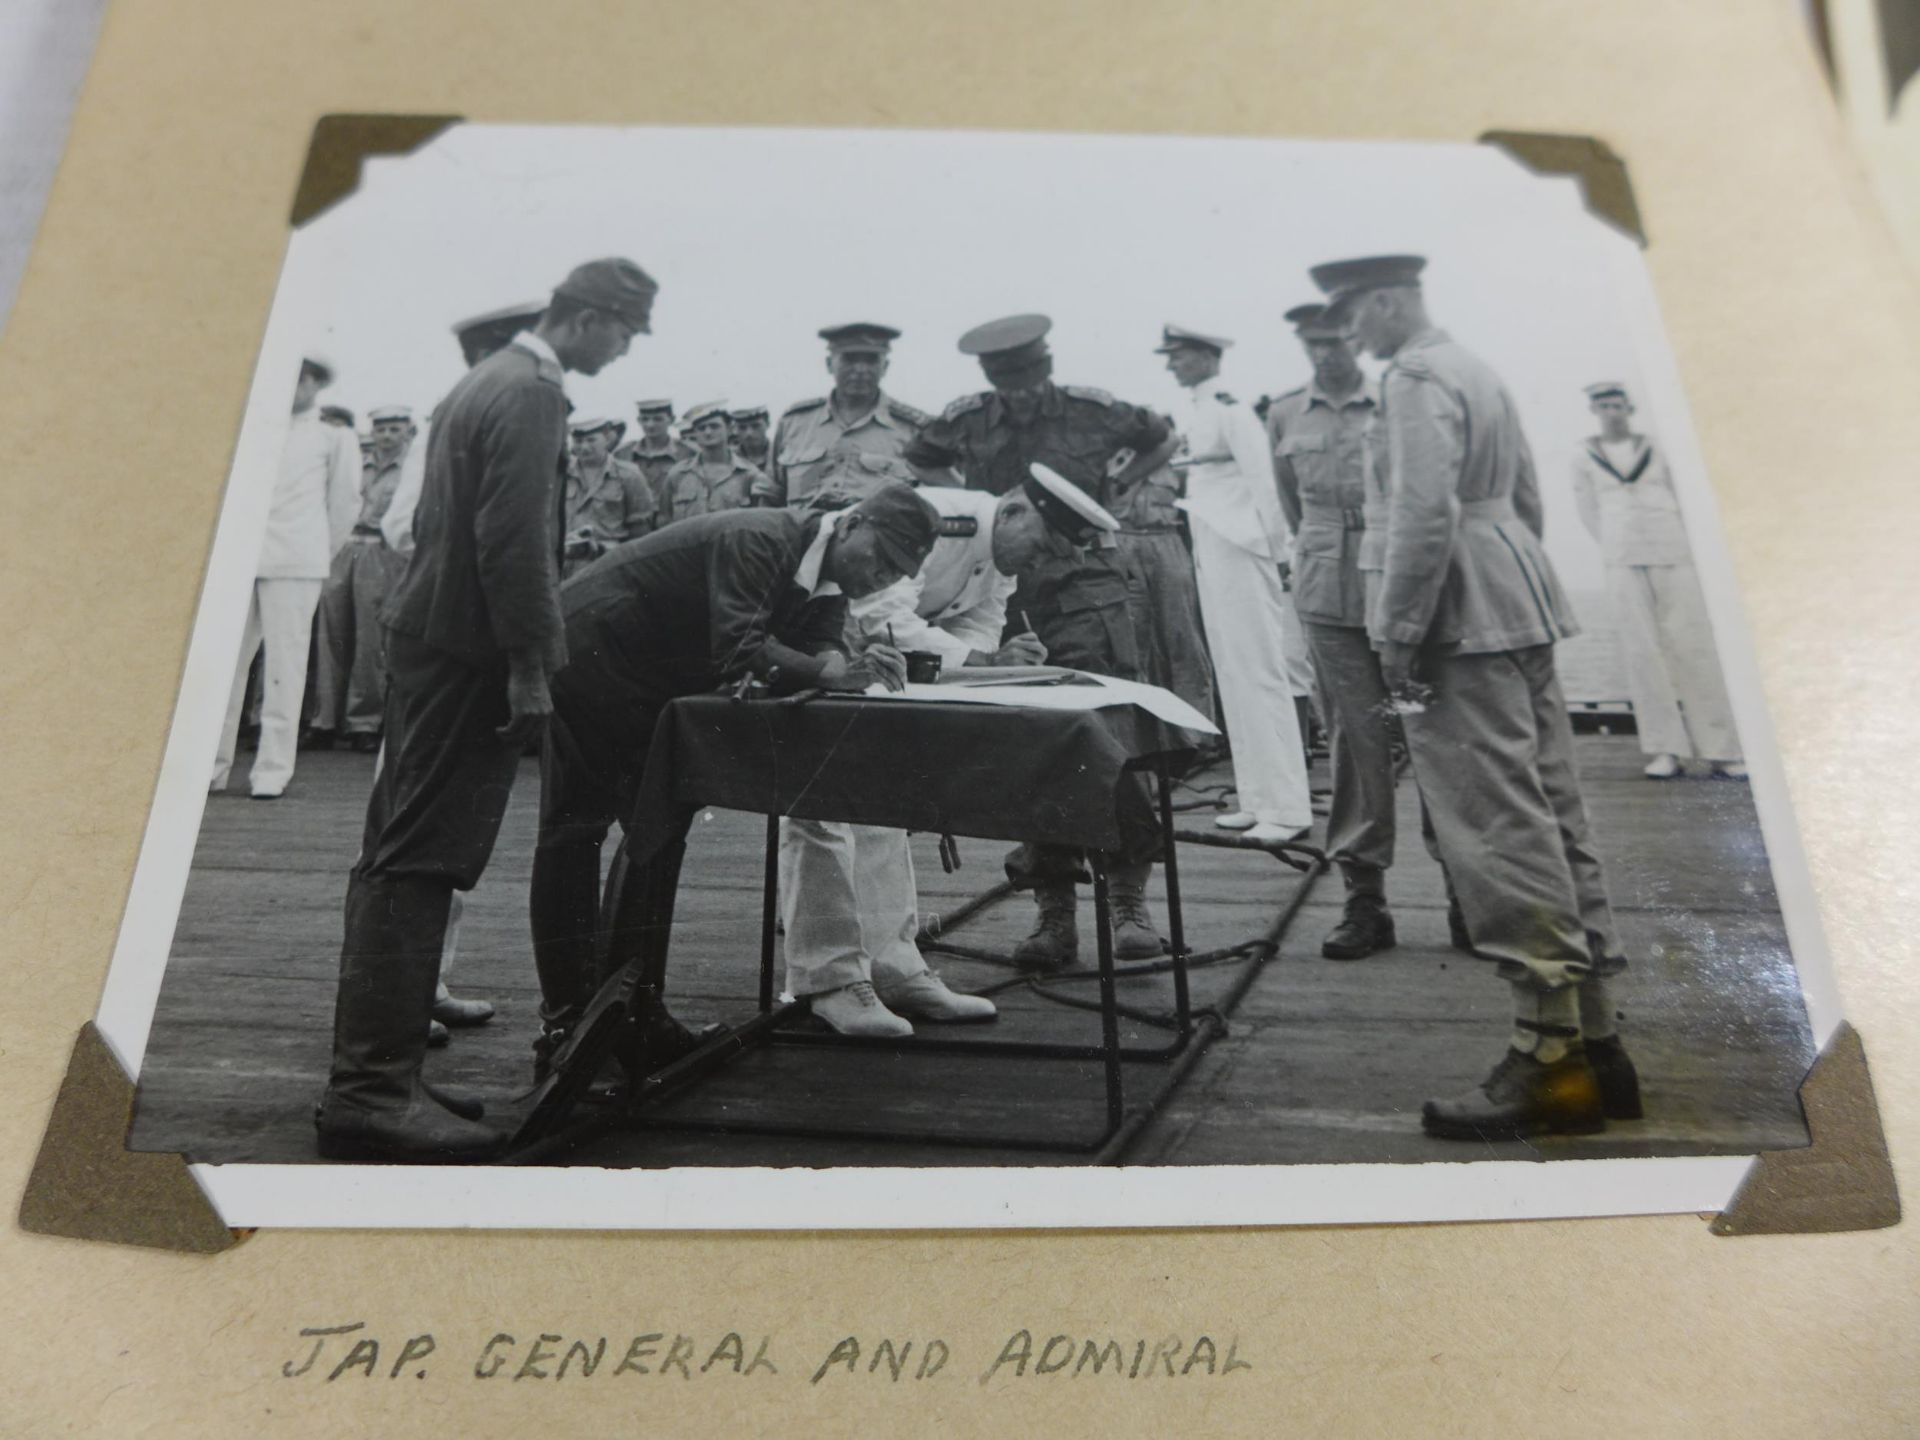 A WORLD WAR II PHOTOGRAPH ALBUM CONTAINING PHOTOGRAPHS OF THE JAPANESE SIGNING OF THE INSTRUMENT - Bild 3 aus 9